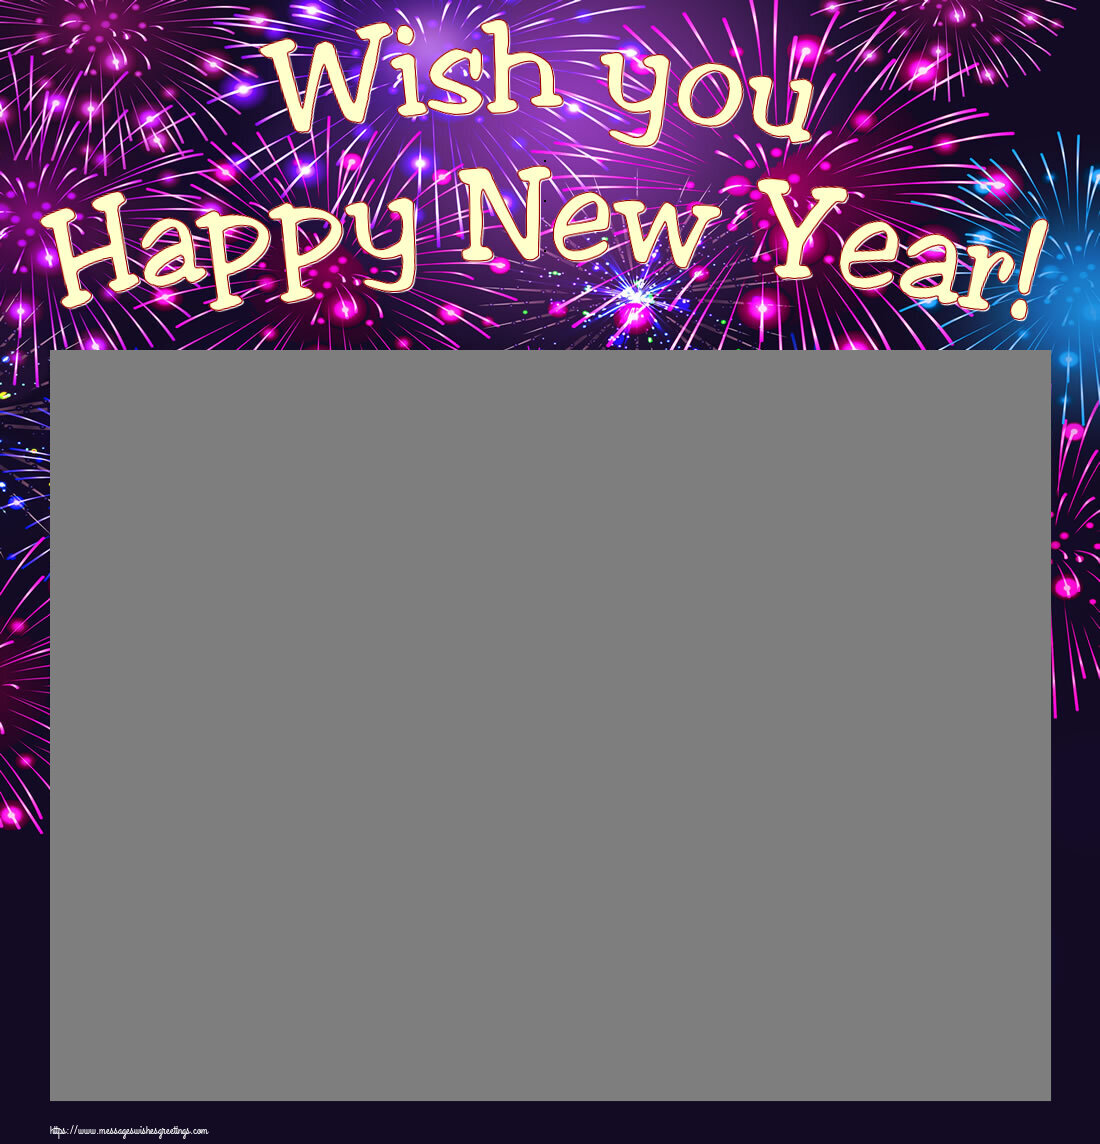 Custom Greetings Cards for New Year - Wish you Happy New Year! - New Year Photo Frame